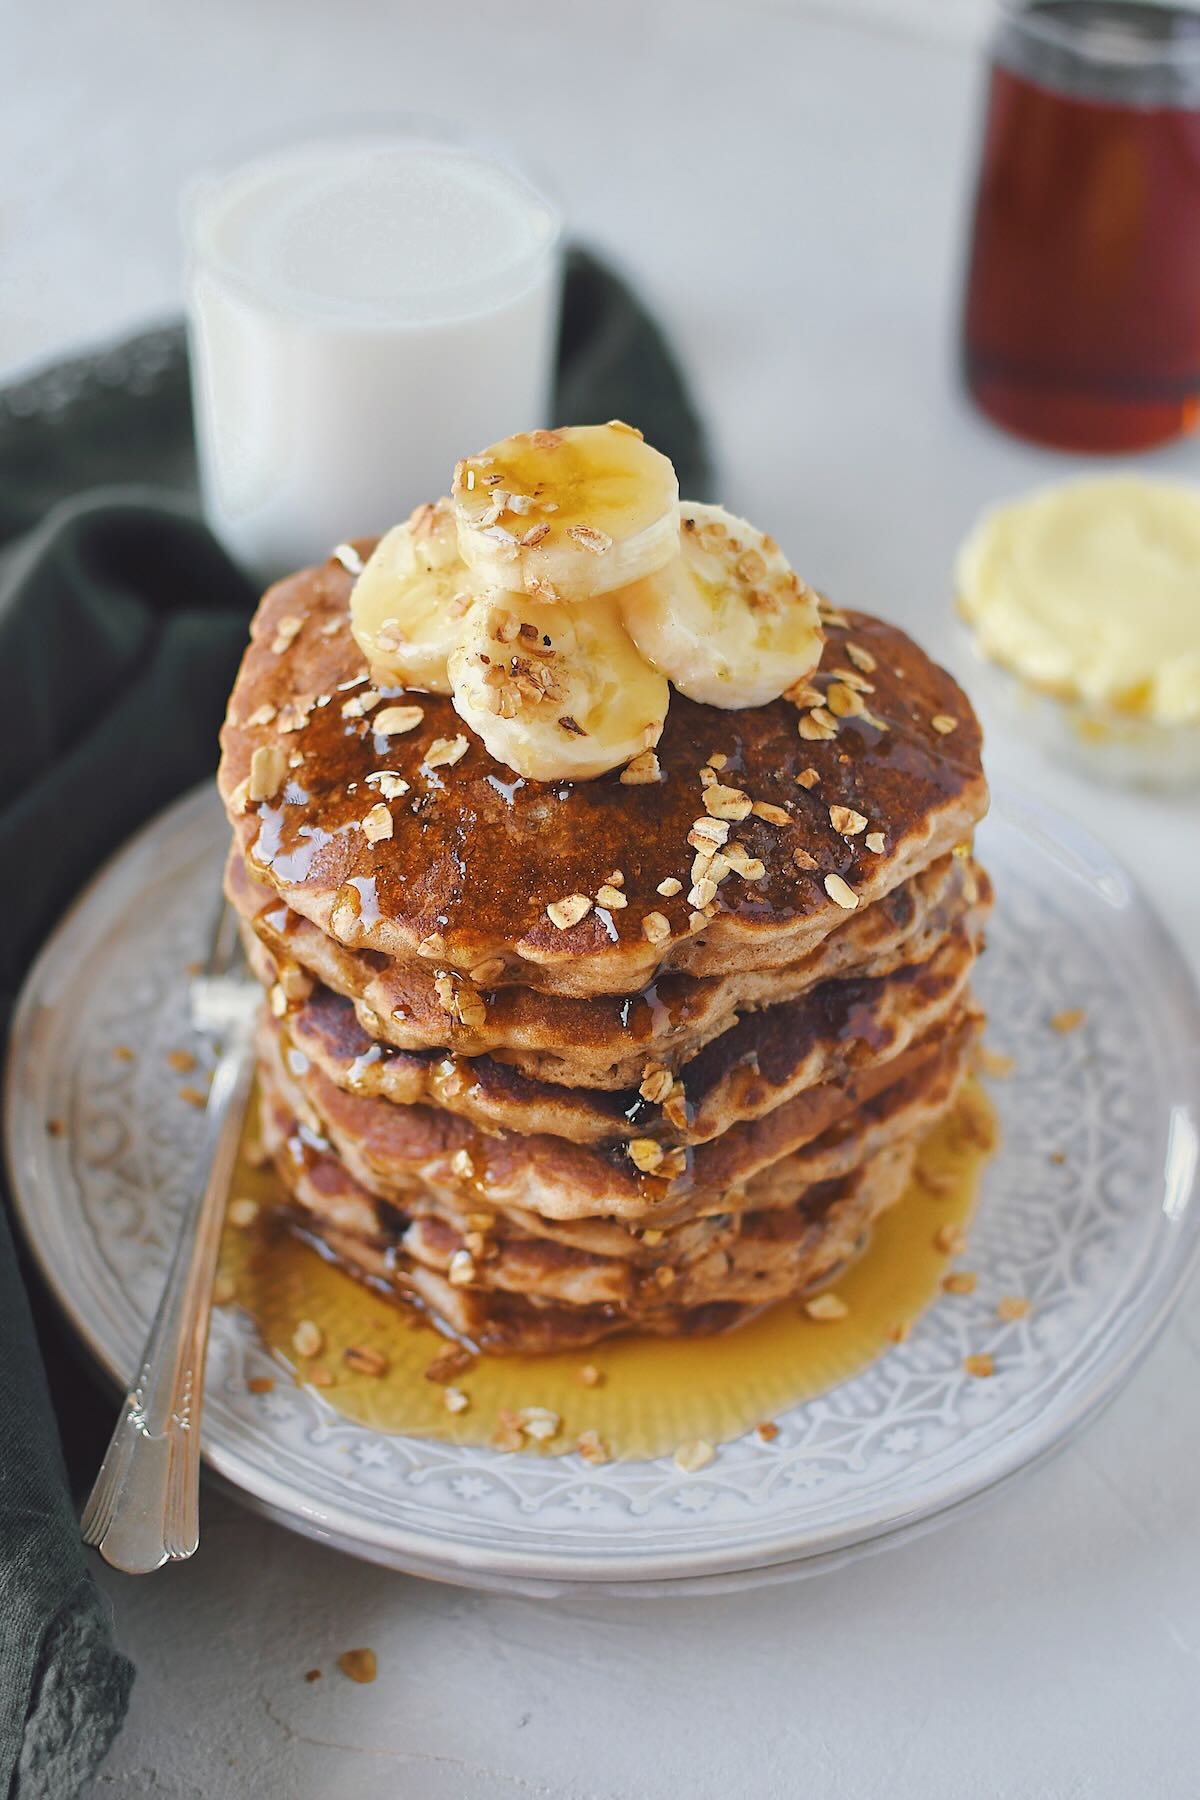 Banana Oat Pancakes stacked high, topped with banana slices and extra mini chocolate chips.